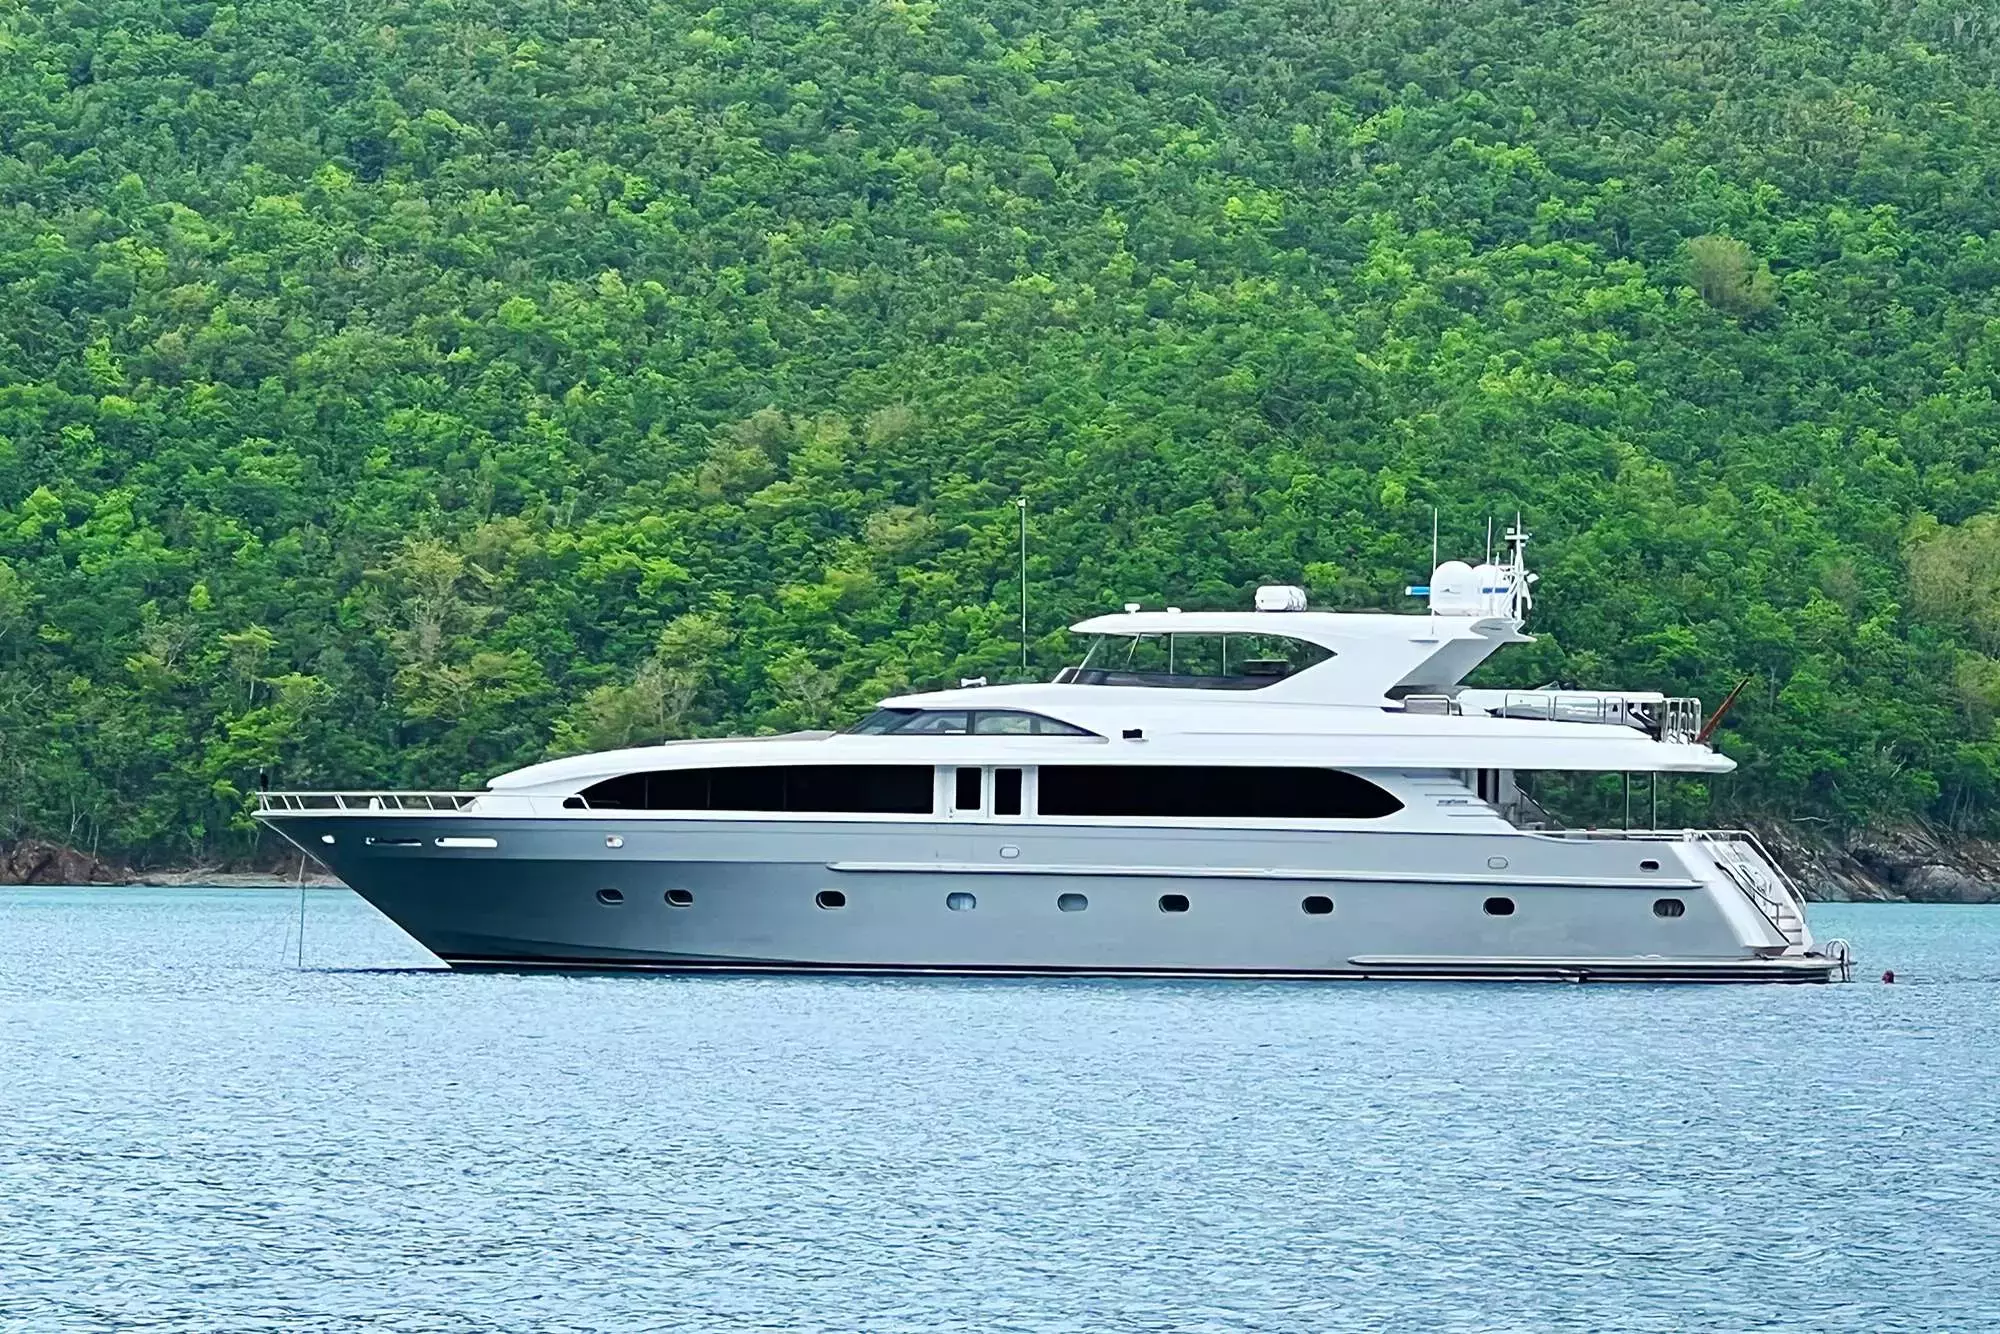 Outta Touch by Intermarine - Top rates for a Charter of a private Motor Yacht in St Barths